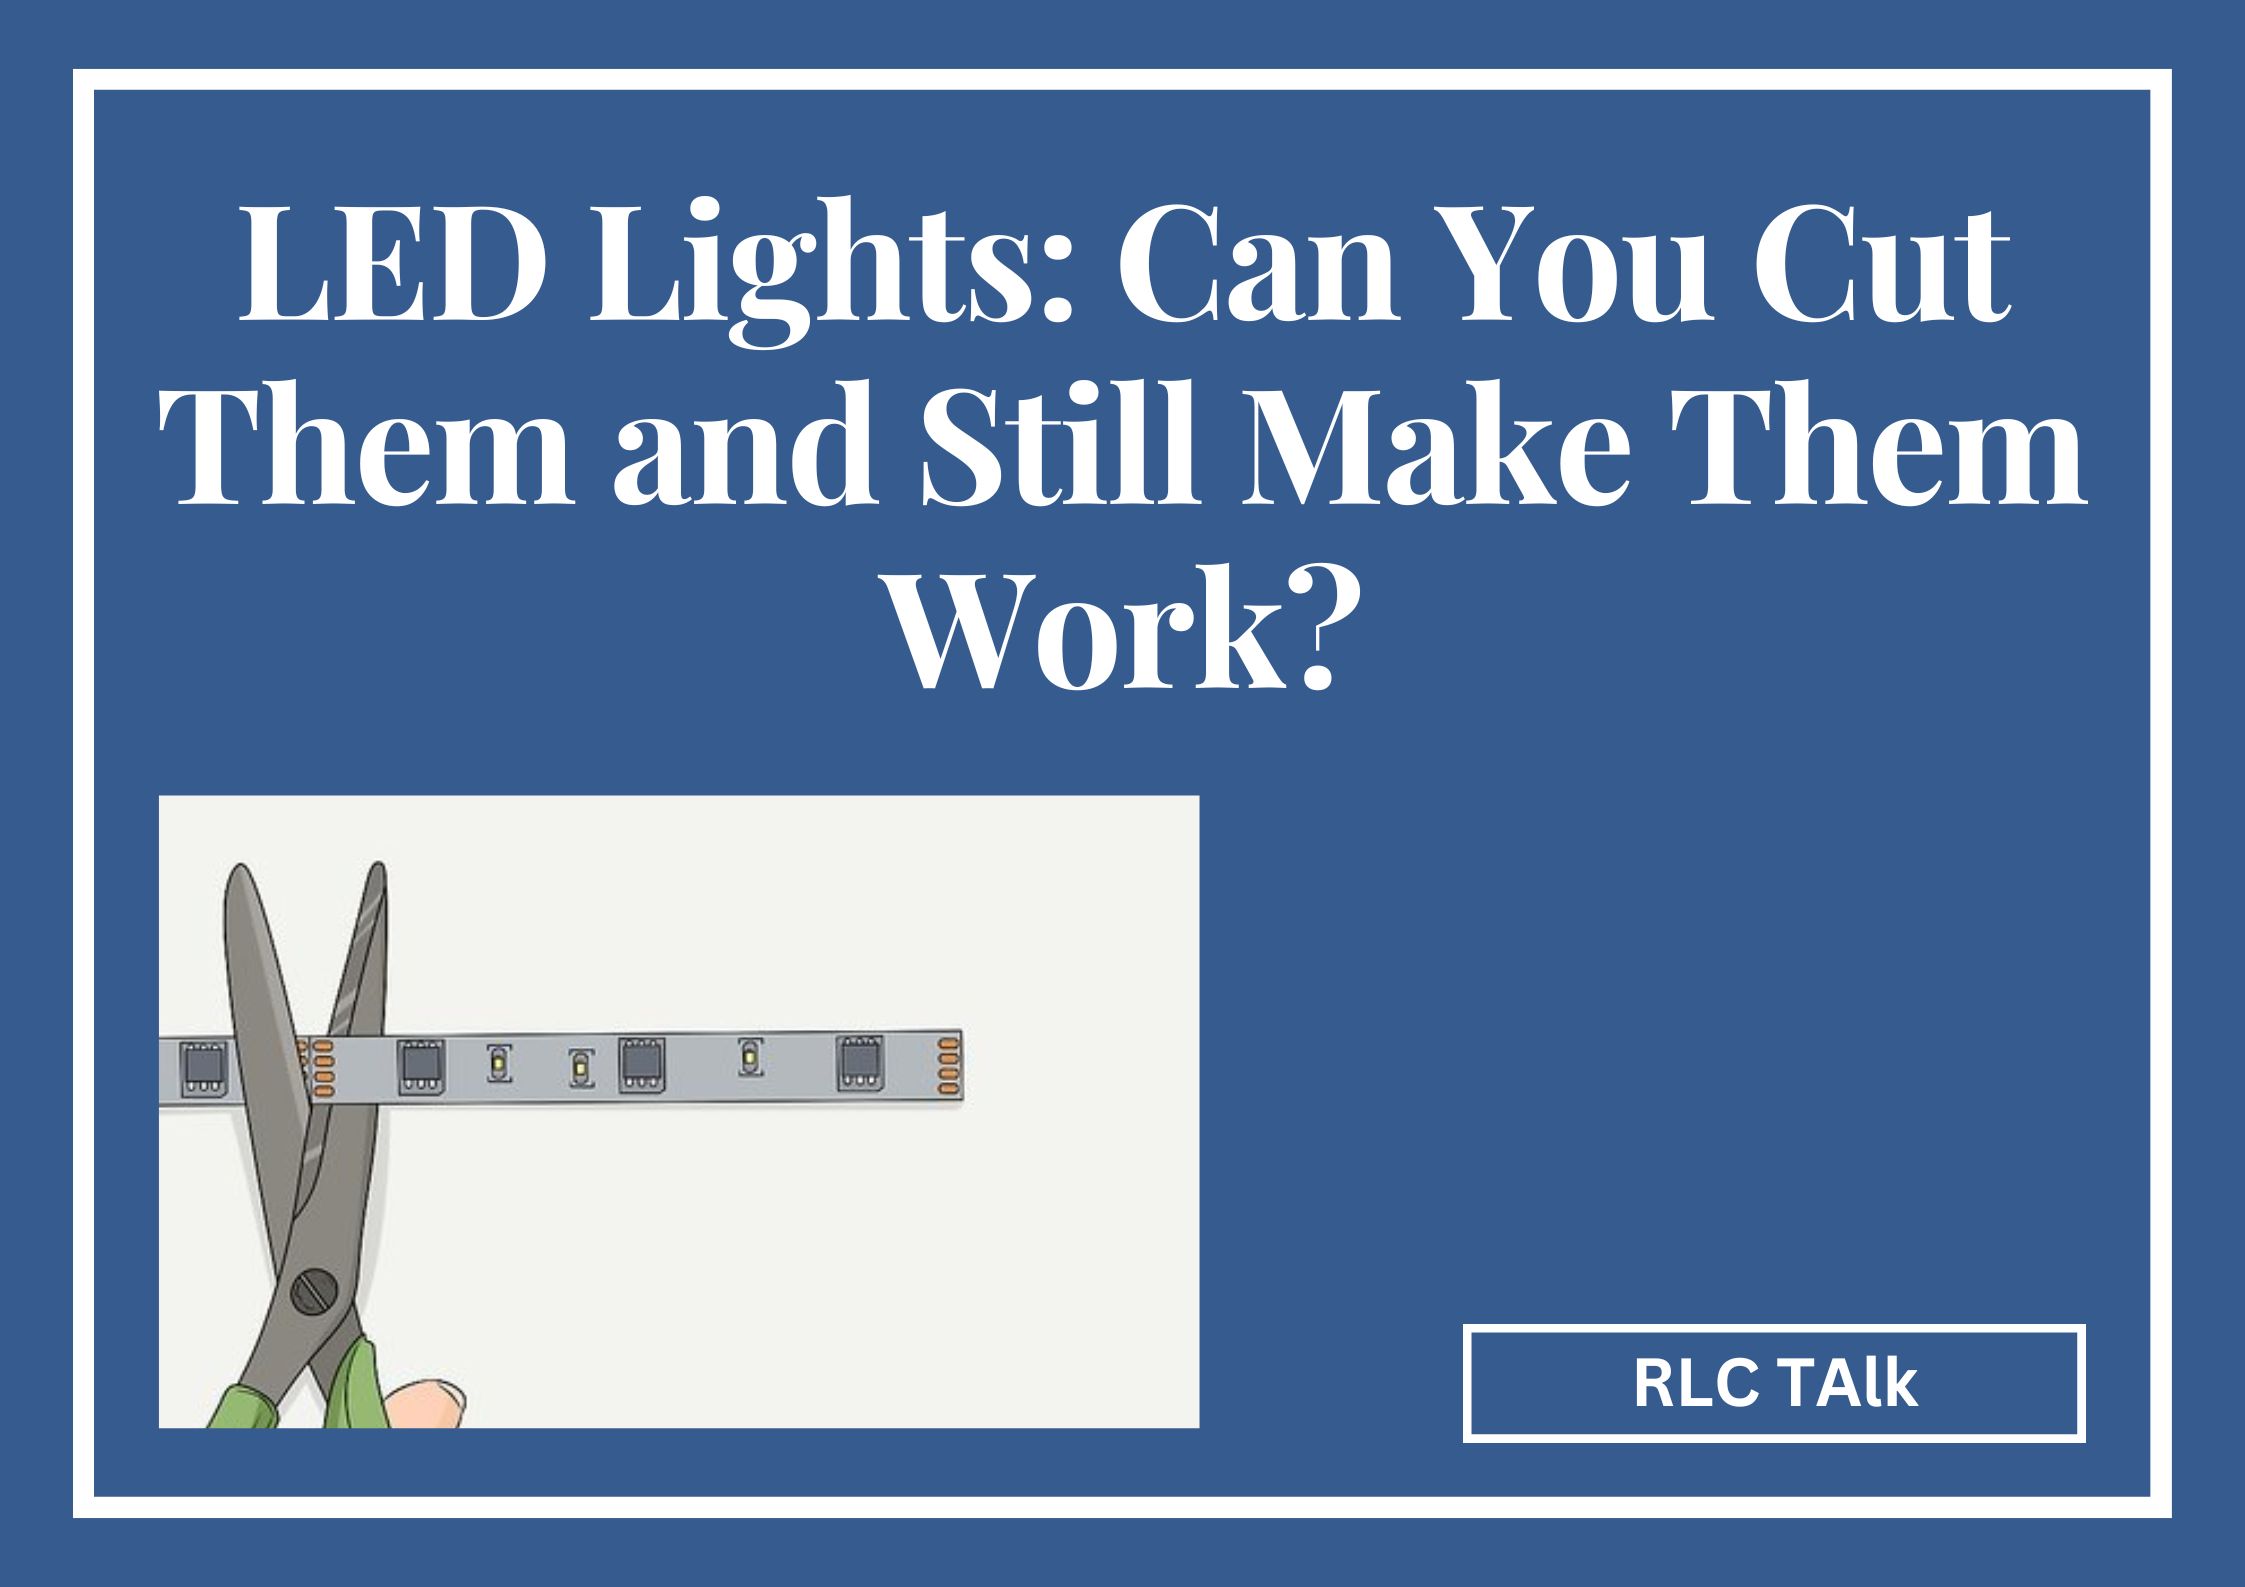 if you cut led lights will it still work